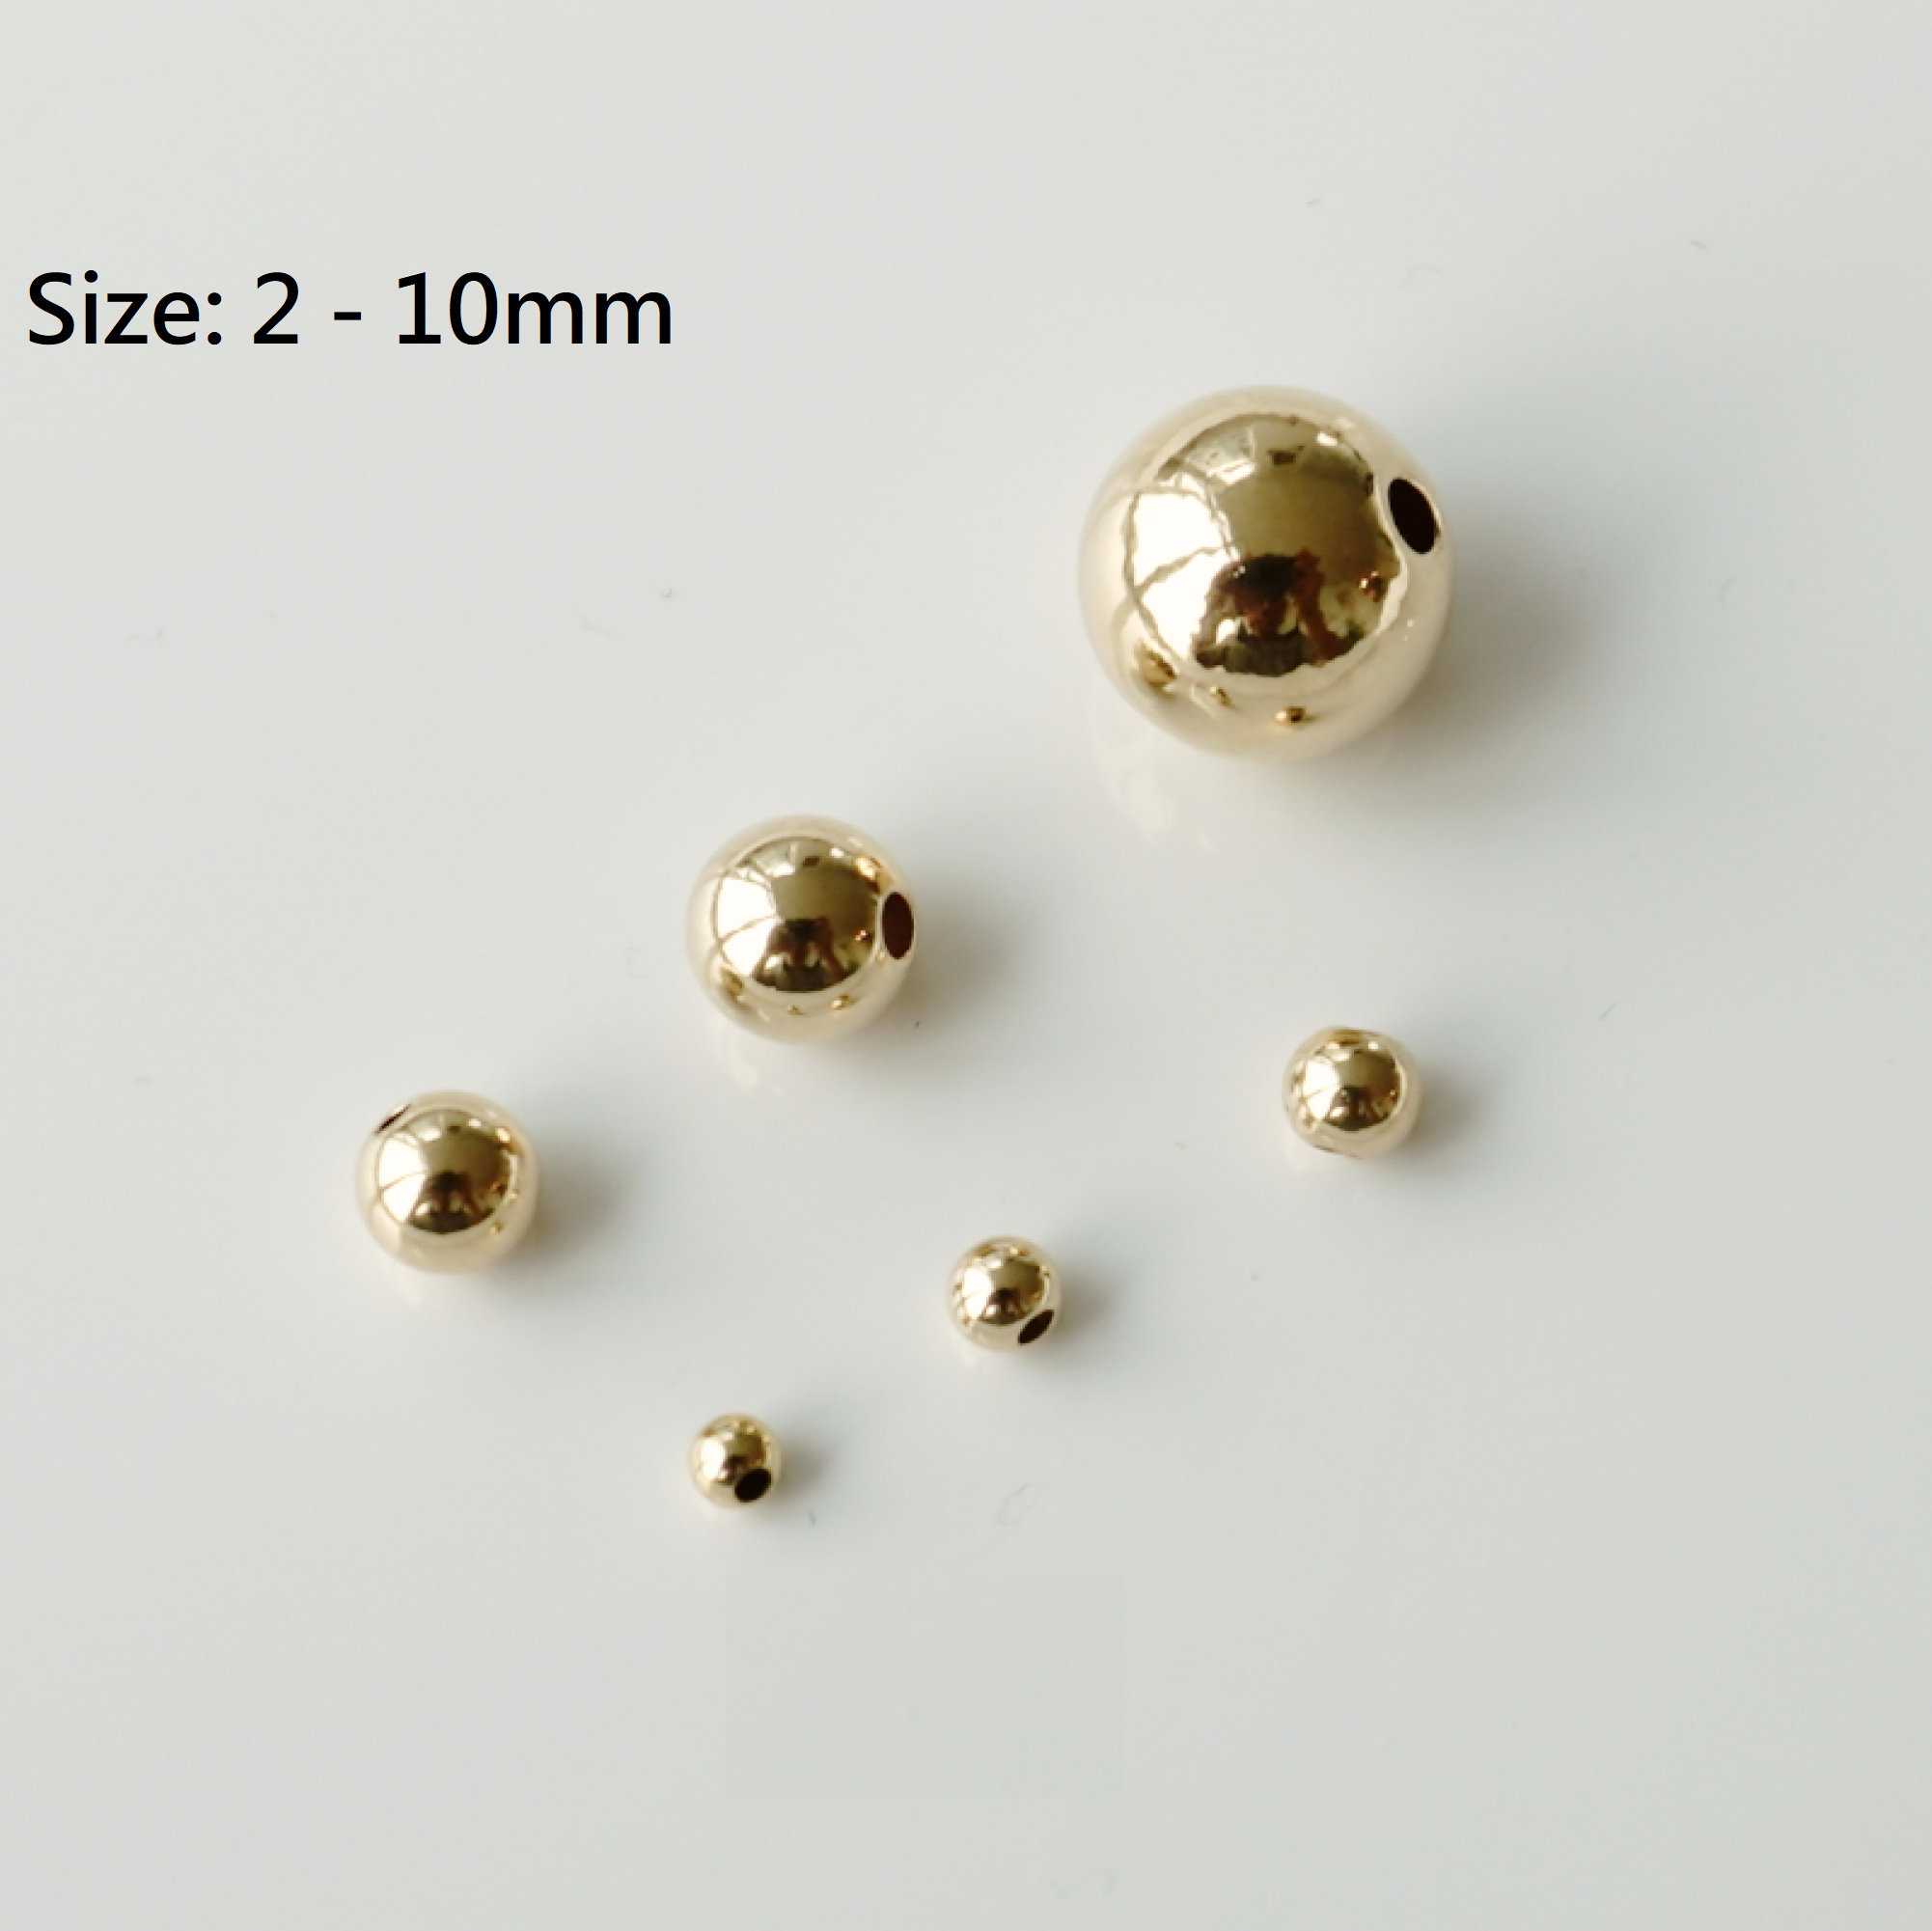 Wide Variety of Gold Filled Beads at Bulk Pricing - GemPacked